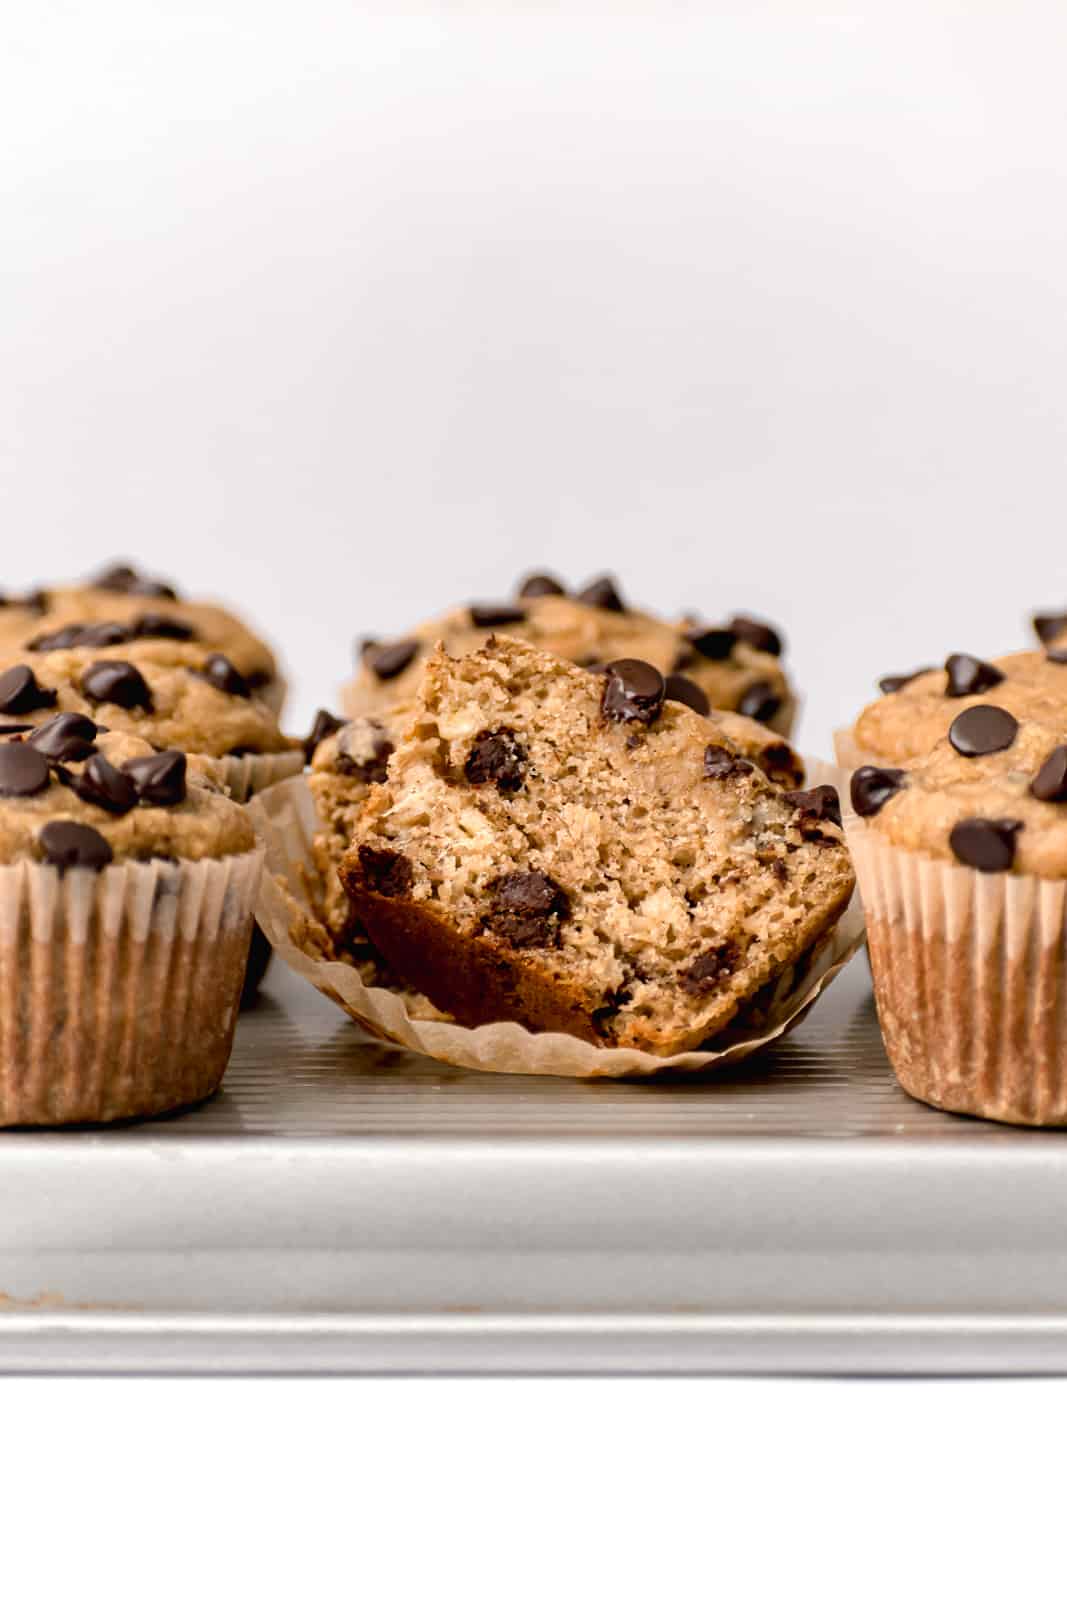 banana tahini chocolate chip muffins on silver baking sheet with one muffin cut in half.